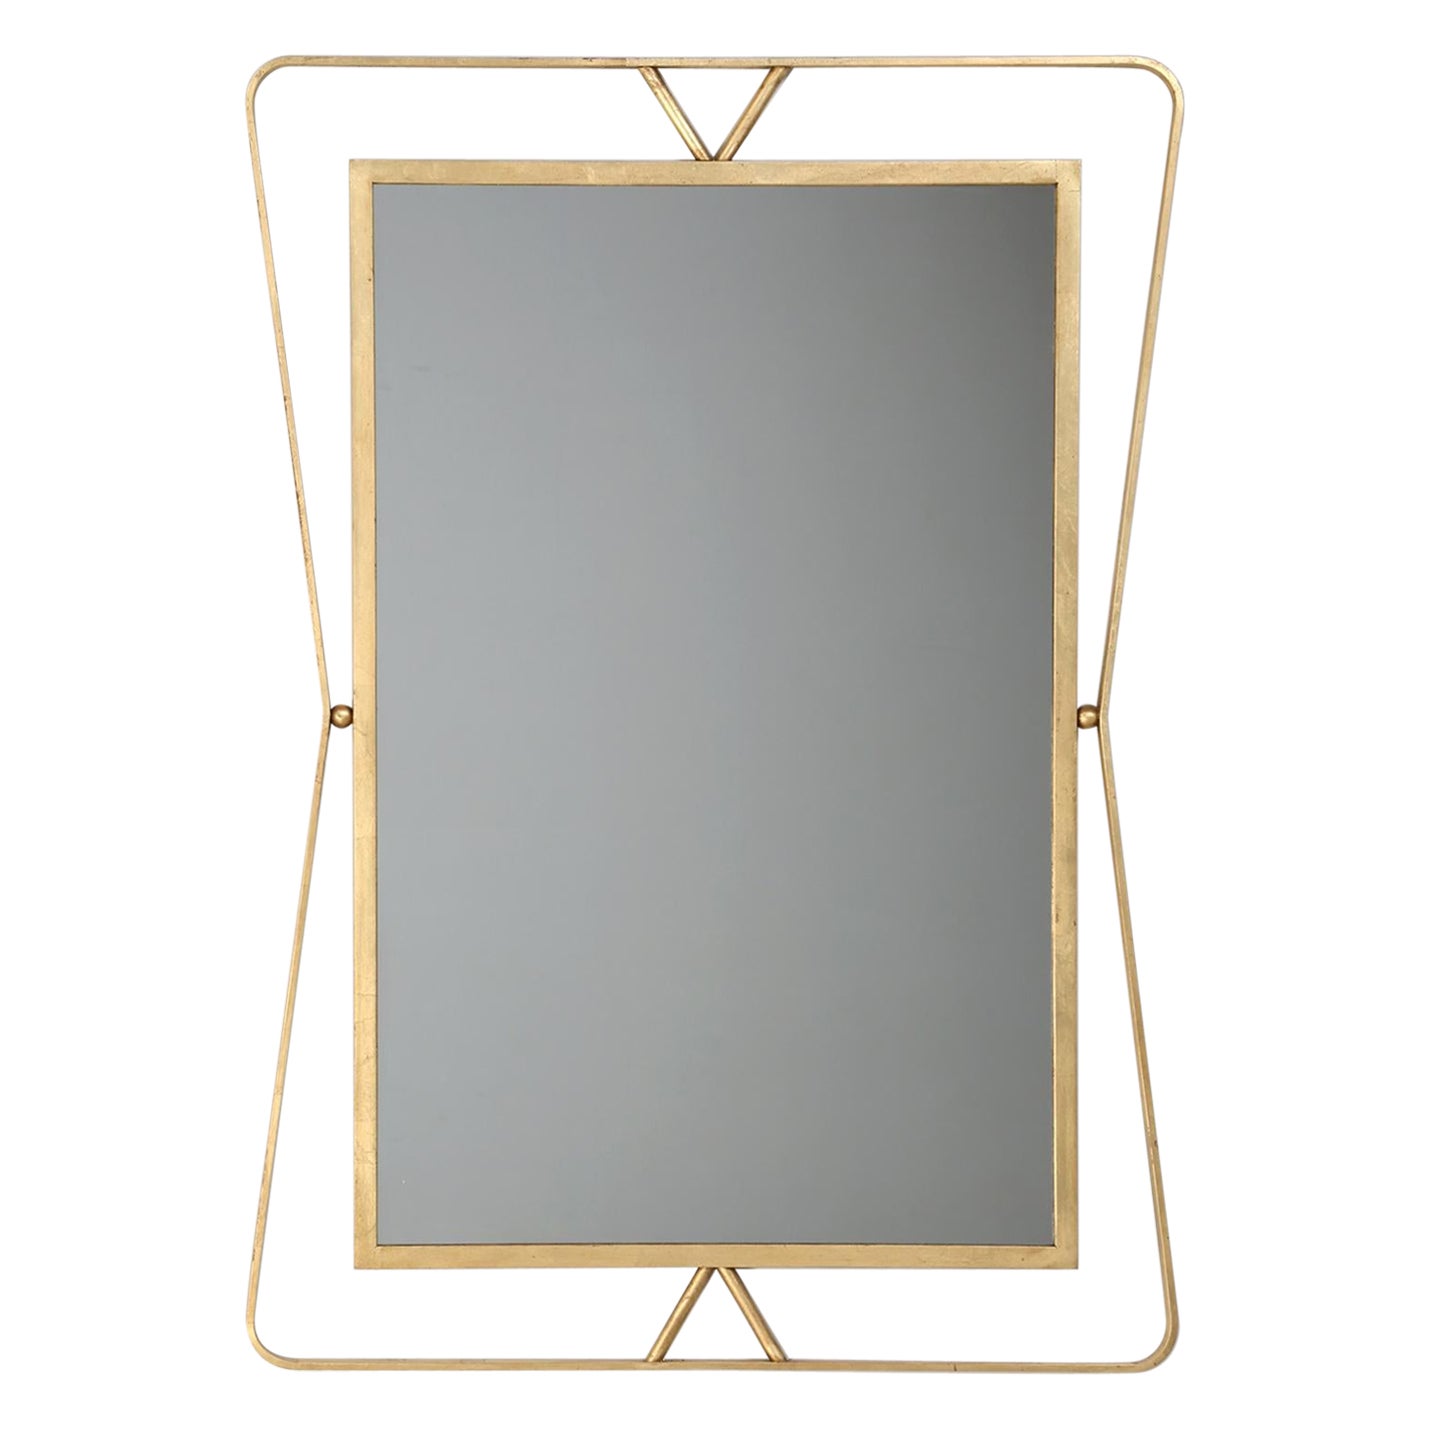 Custom Hand-Made by Old Plank Gilded Wall Mirror Available Any Dimension, Finish For Sale